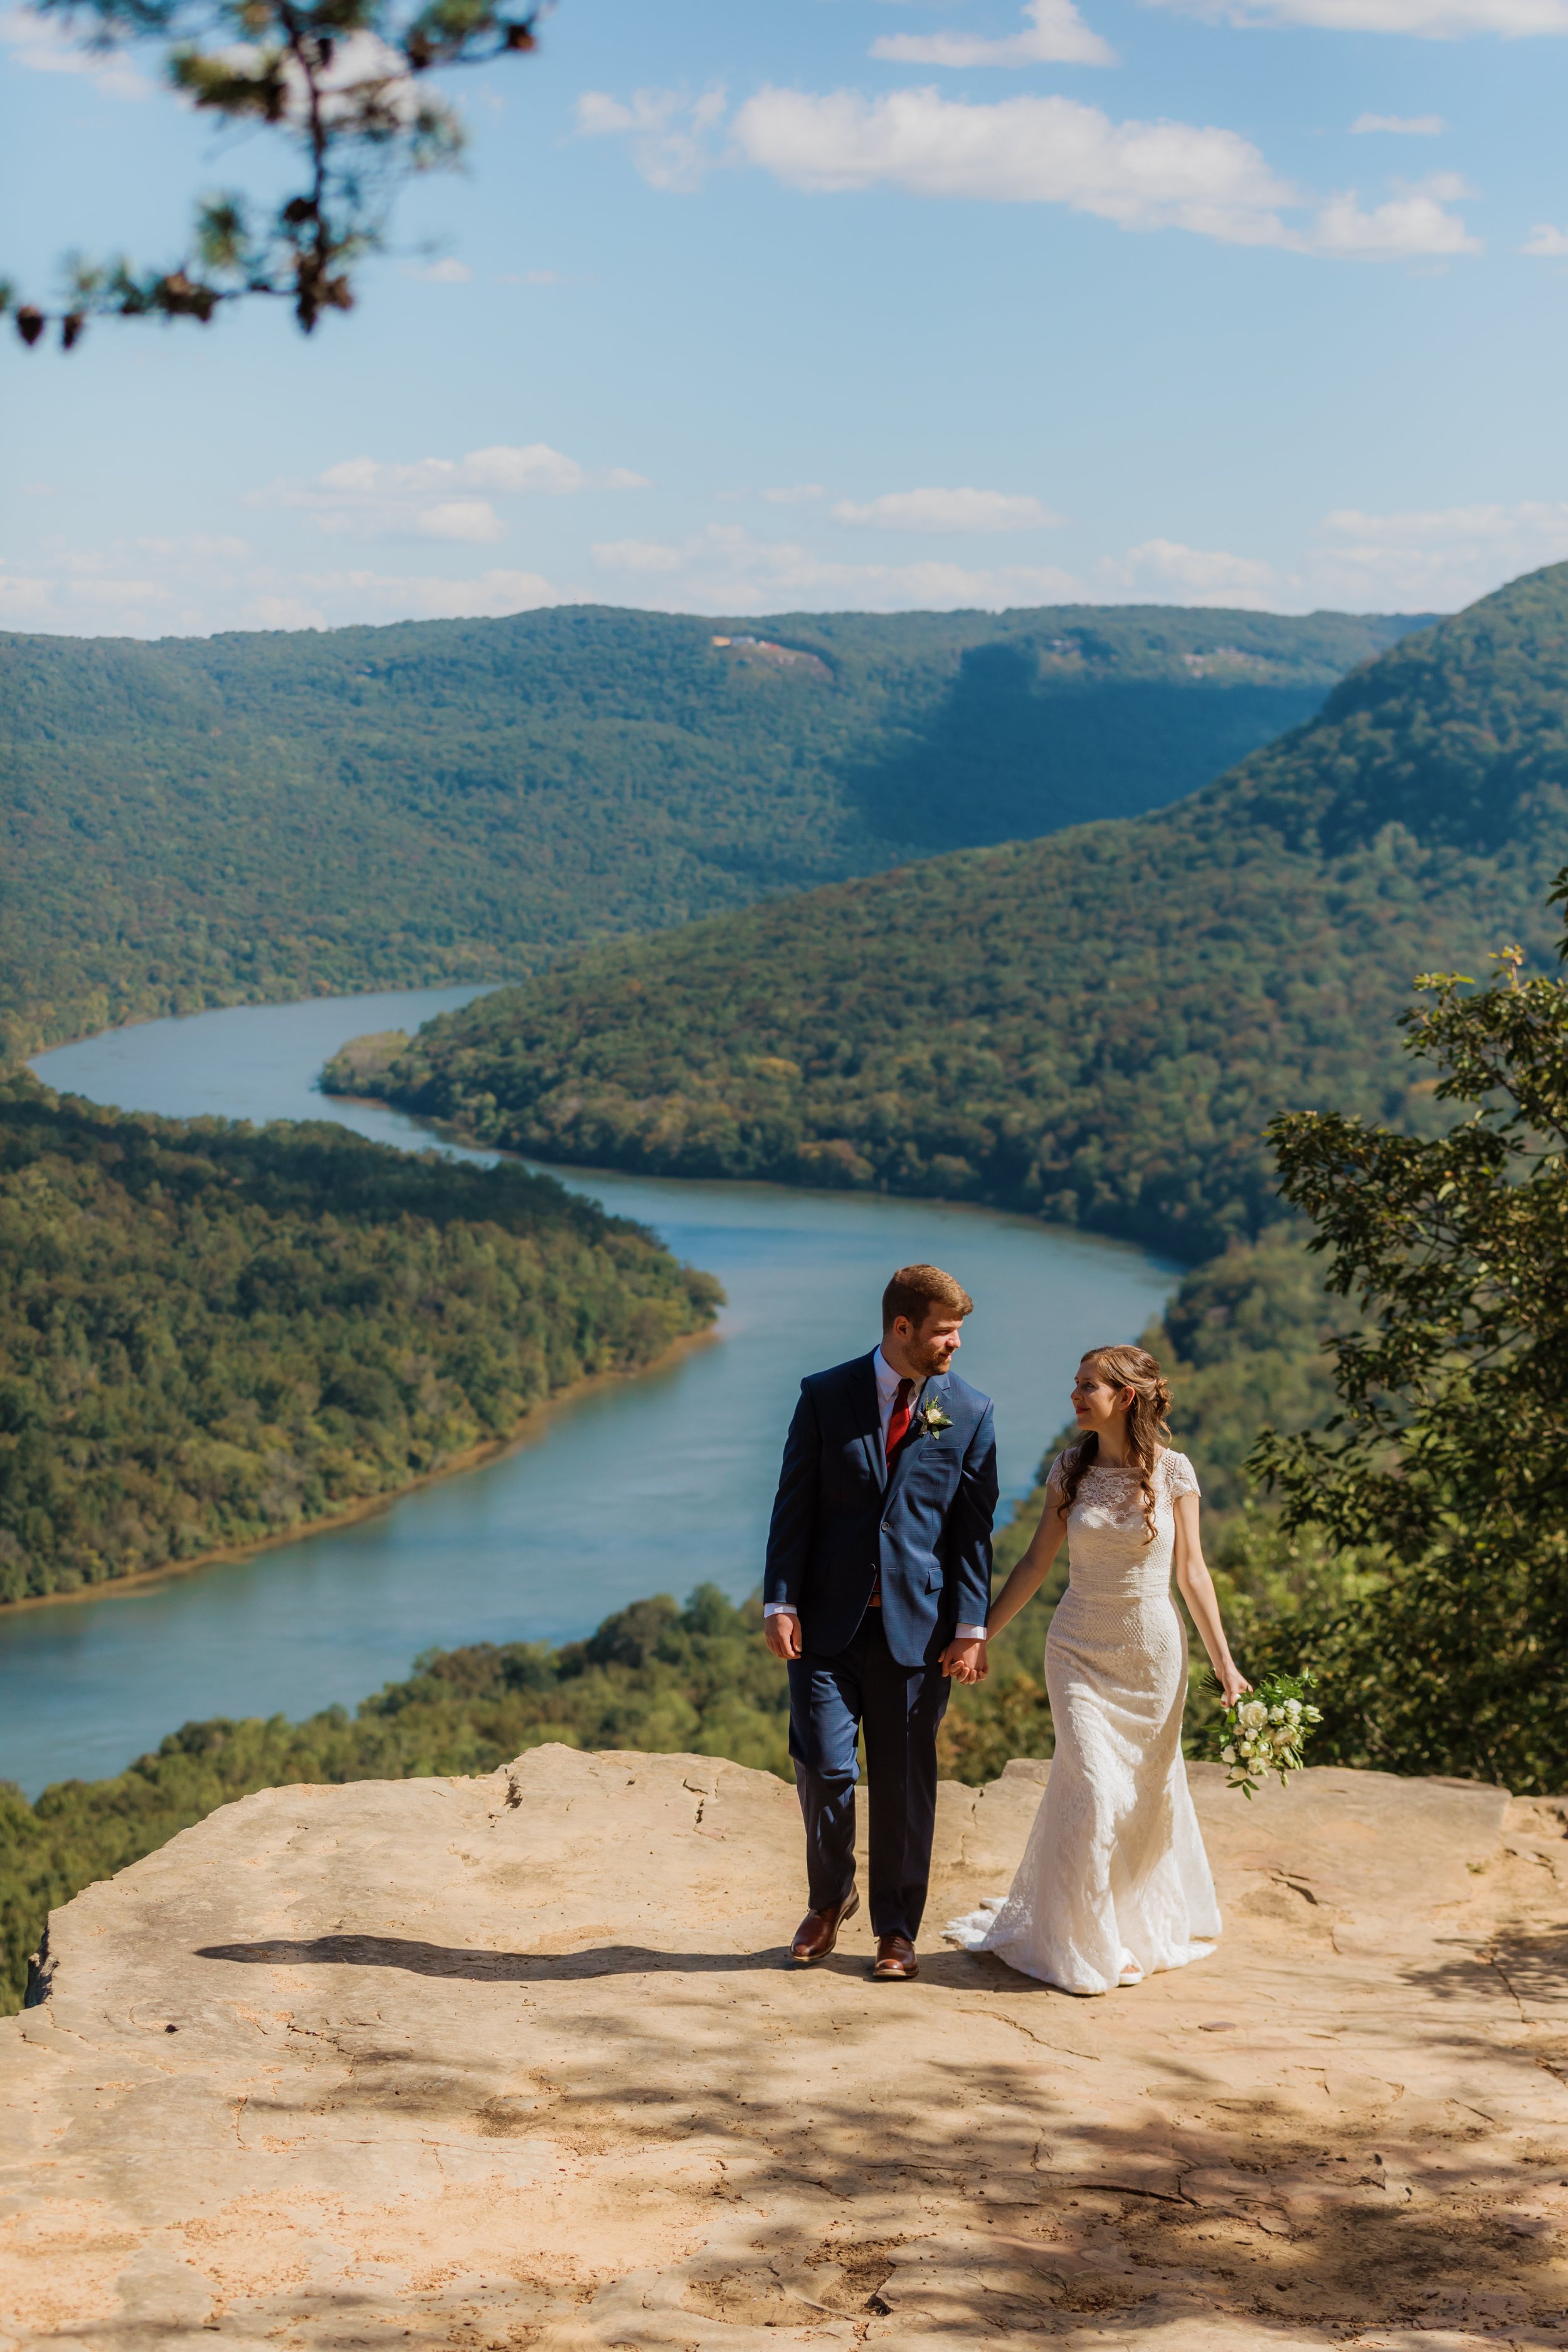  Stunning wedding photography by a top Chattanooga photographer 